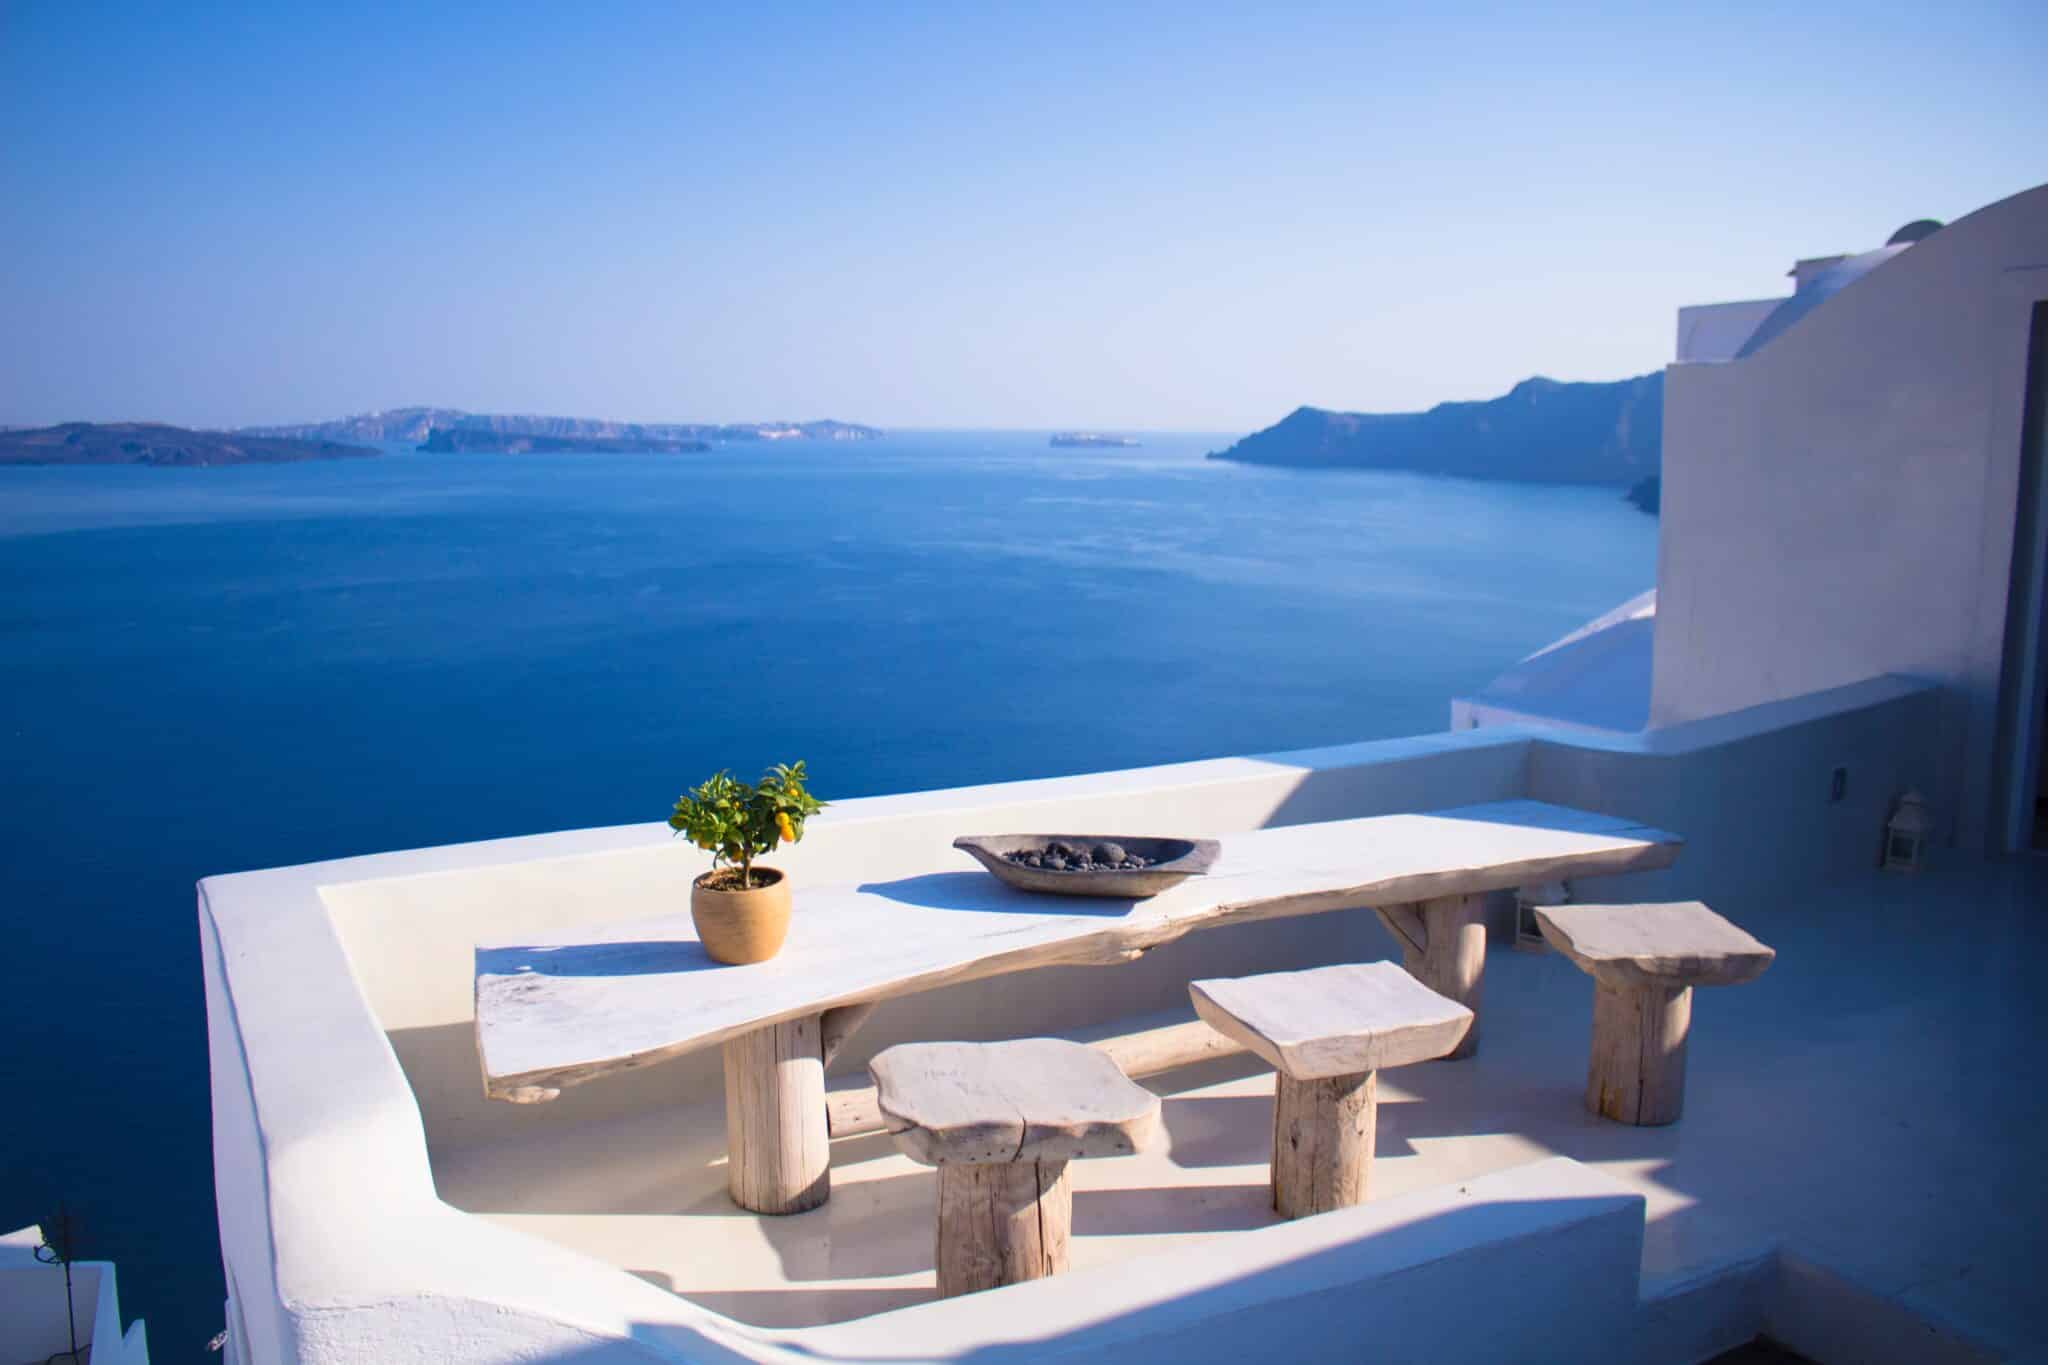 Very Greek table and view